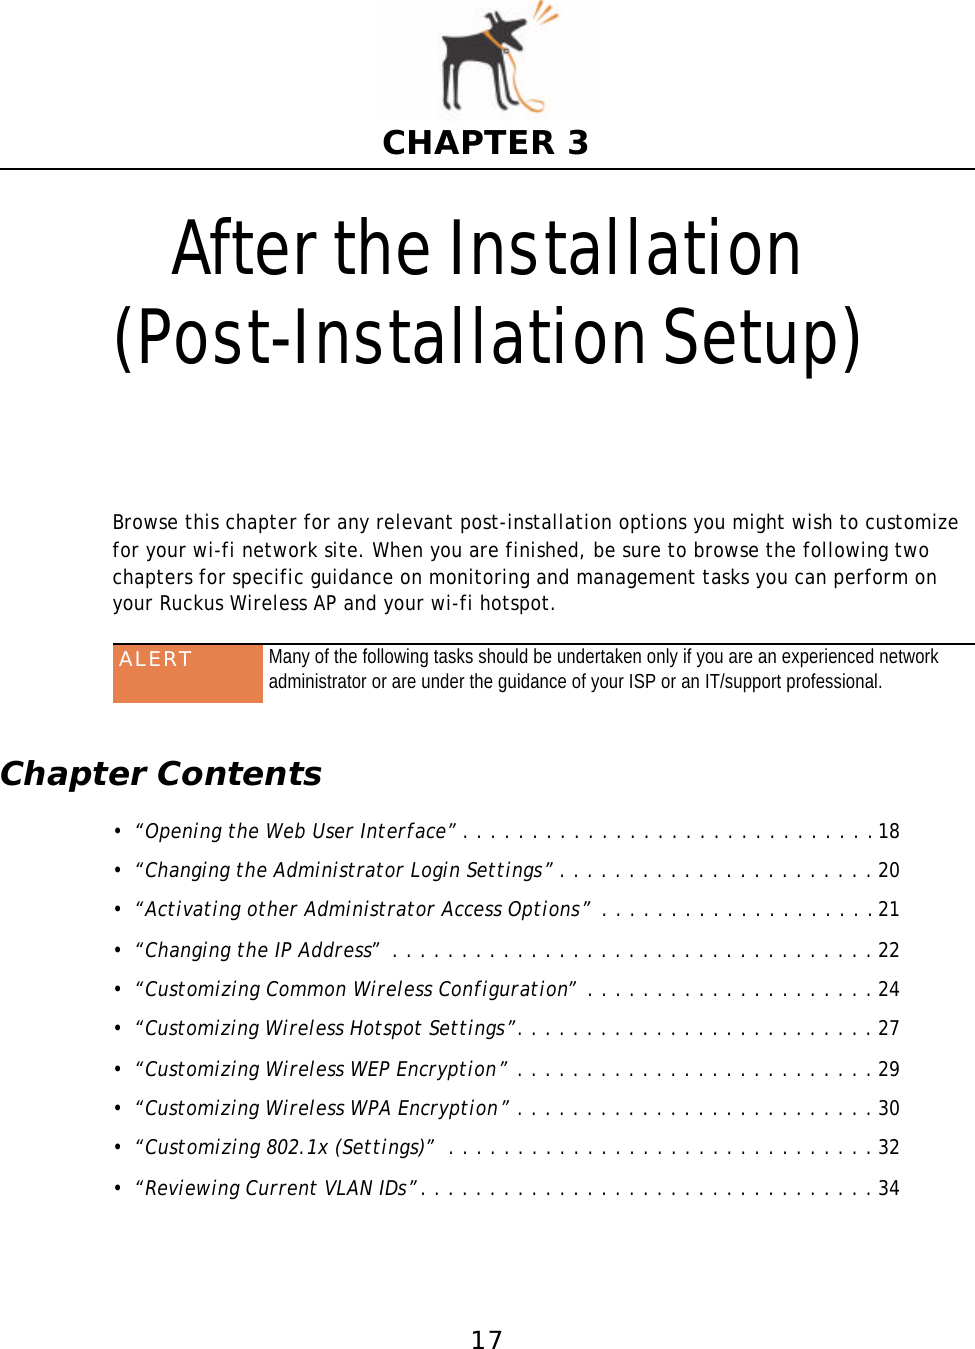 17CHAPTER 3After the Installation(Post-Installation Setup)Browse this chapter for any relevant post-installation options you might wish to customize for your wi-fi network site. When you are finished, be sure to browse the following two chapters for specific guidance on monitoring and management tasks you can perform on your Ruckus Wireless AP and your wi-fi hotspot. Chapter Contents•“Opening the Web User Interface”. . . . . . . . . . . . . . . . . . . . . . . . . . . . . .18•“Changing the Administrator Login Settings”. . . . . . . . . . . . . . . . . . . . . . . 20•“Activating other Administrator Access Options” . . . . . . . . . . . . . . . . . . . .21•“Changing the IP Address” . . . . . . . . . . . . . . . . . . . . . . . . . . . . . . . . . . . 22•“Customizing Common Wireless Configuration” . . . . . . . . . . . . . . . . . . . . . 24•“Customizing Wireless Hotspot Settings”. . . . . . . . . . . . . . . . . . . . . . . . . . 27•“Customizing Wireless WEP Encryption” . . . . . . . . . . . . . . . . . . . . . . . . . . 29•“Customizing Wireless WPA Encryption” . . . . . . . . . . . . . . . . . . . . . . . . . . 30•“Customizing 802.1x (Settings)” . . . . . . . . . . . . . . . . . . . . . . . . . . . . . . . 32•“Reviewing Current VLAN IDs”. . . . . . . . . . . . . . . . . . . . . . . . . . . . . . . . . 34ALERT Many of the following tasks should be undertaken only if you are an experienced network administrator or are under the guidance of your ISP or an IT/support professional.